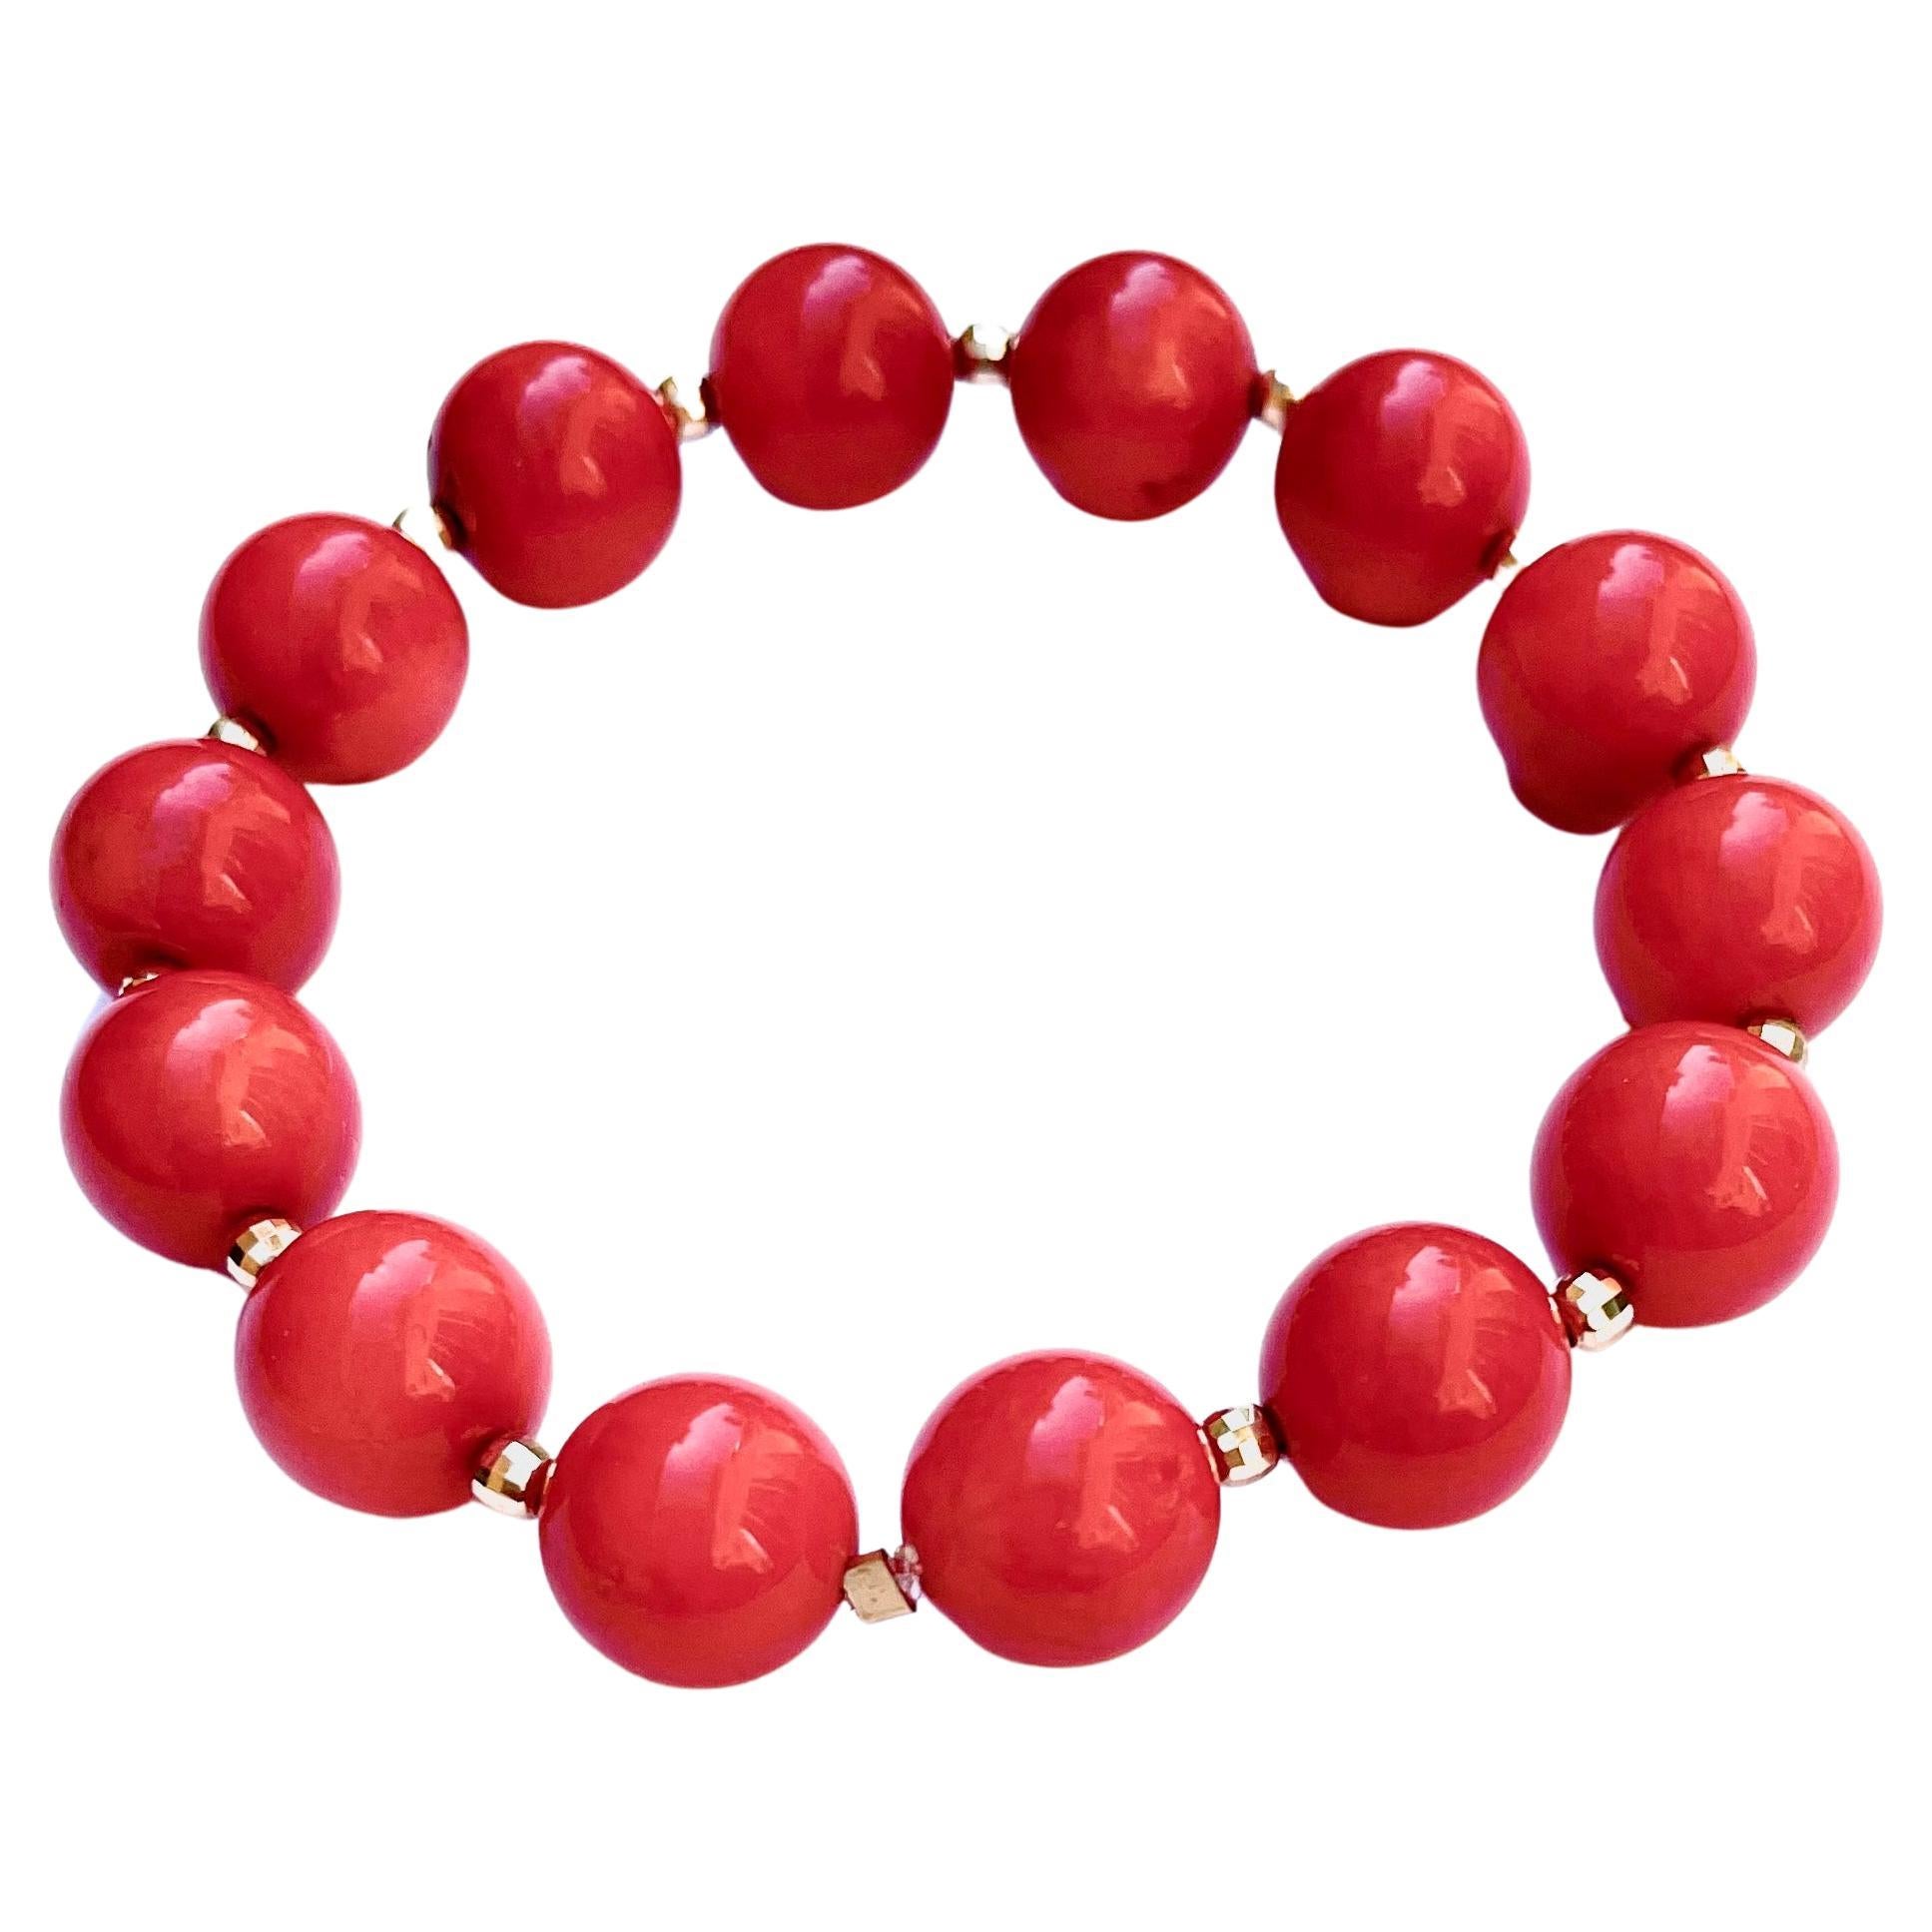 Description
Vibrant red Coral with 14k yellow gold faceted balls stretchy bracelet. Order 2 and stack them for a more stunning all season look.
Item # B1272

Materials and Weight
Coral 127 carats, 11mm, round beads.
Faceted balls 3mm 14k yellow